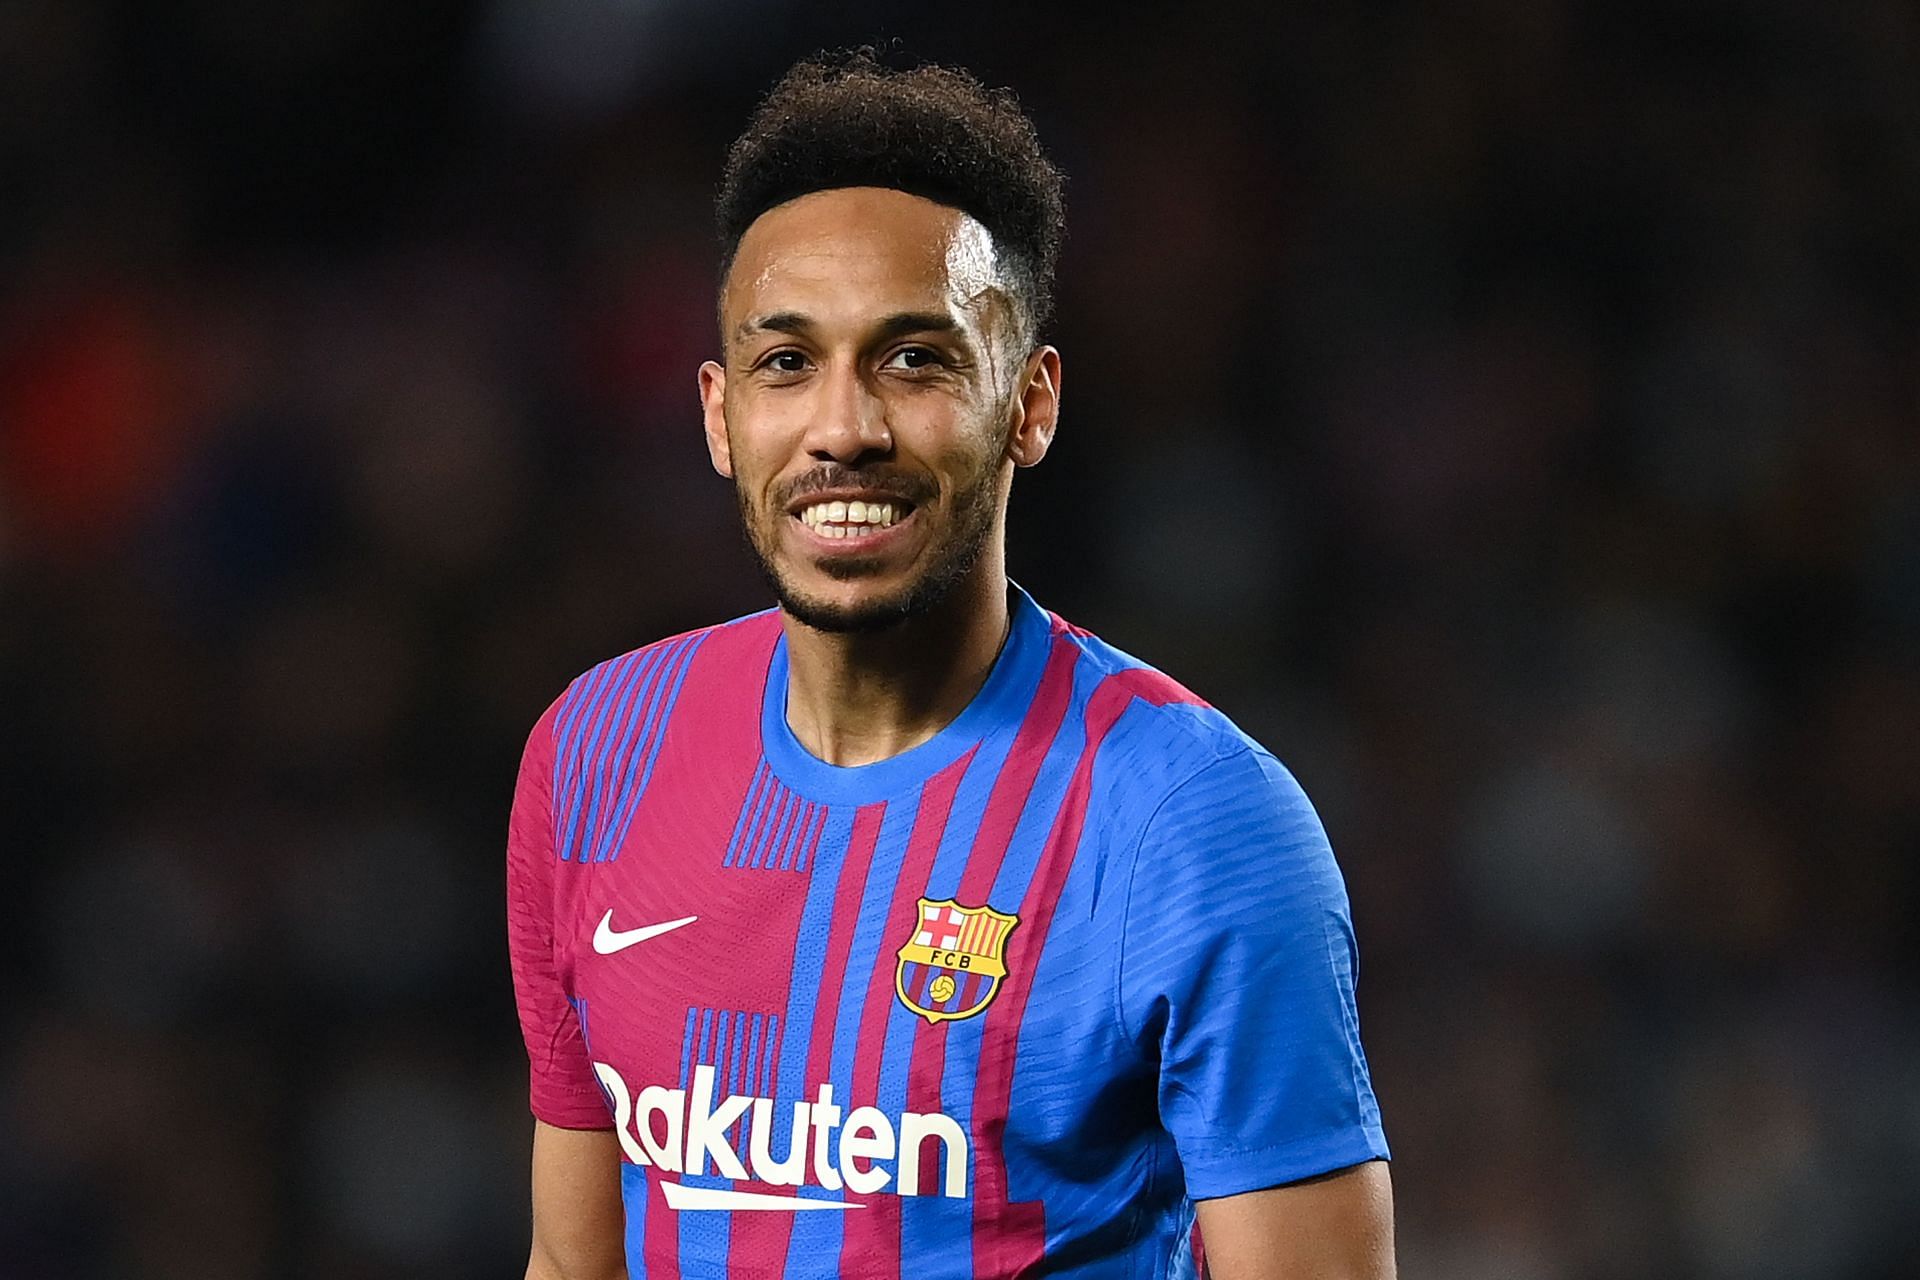 Pierre-Emerick Aubameyang has turned over a new leaf at the Camp Nou.